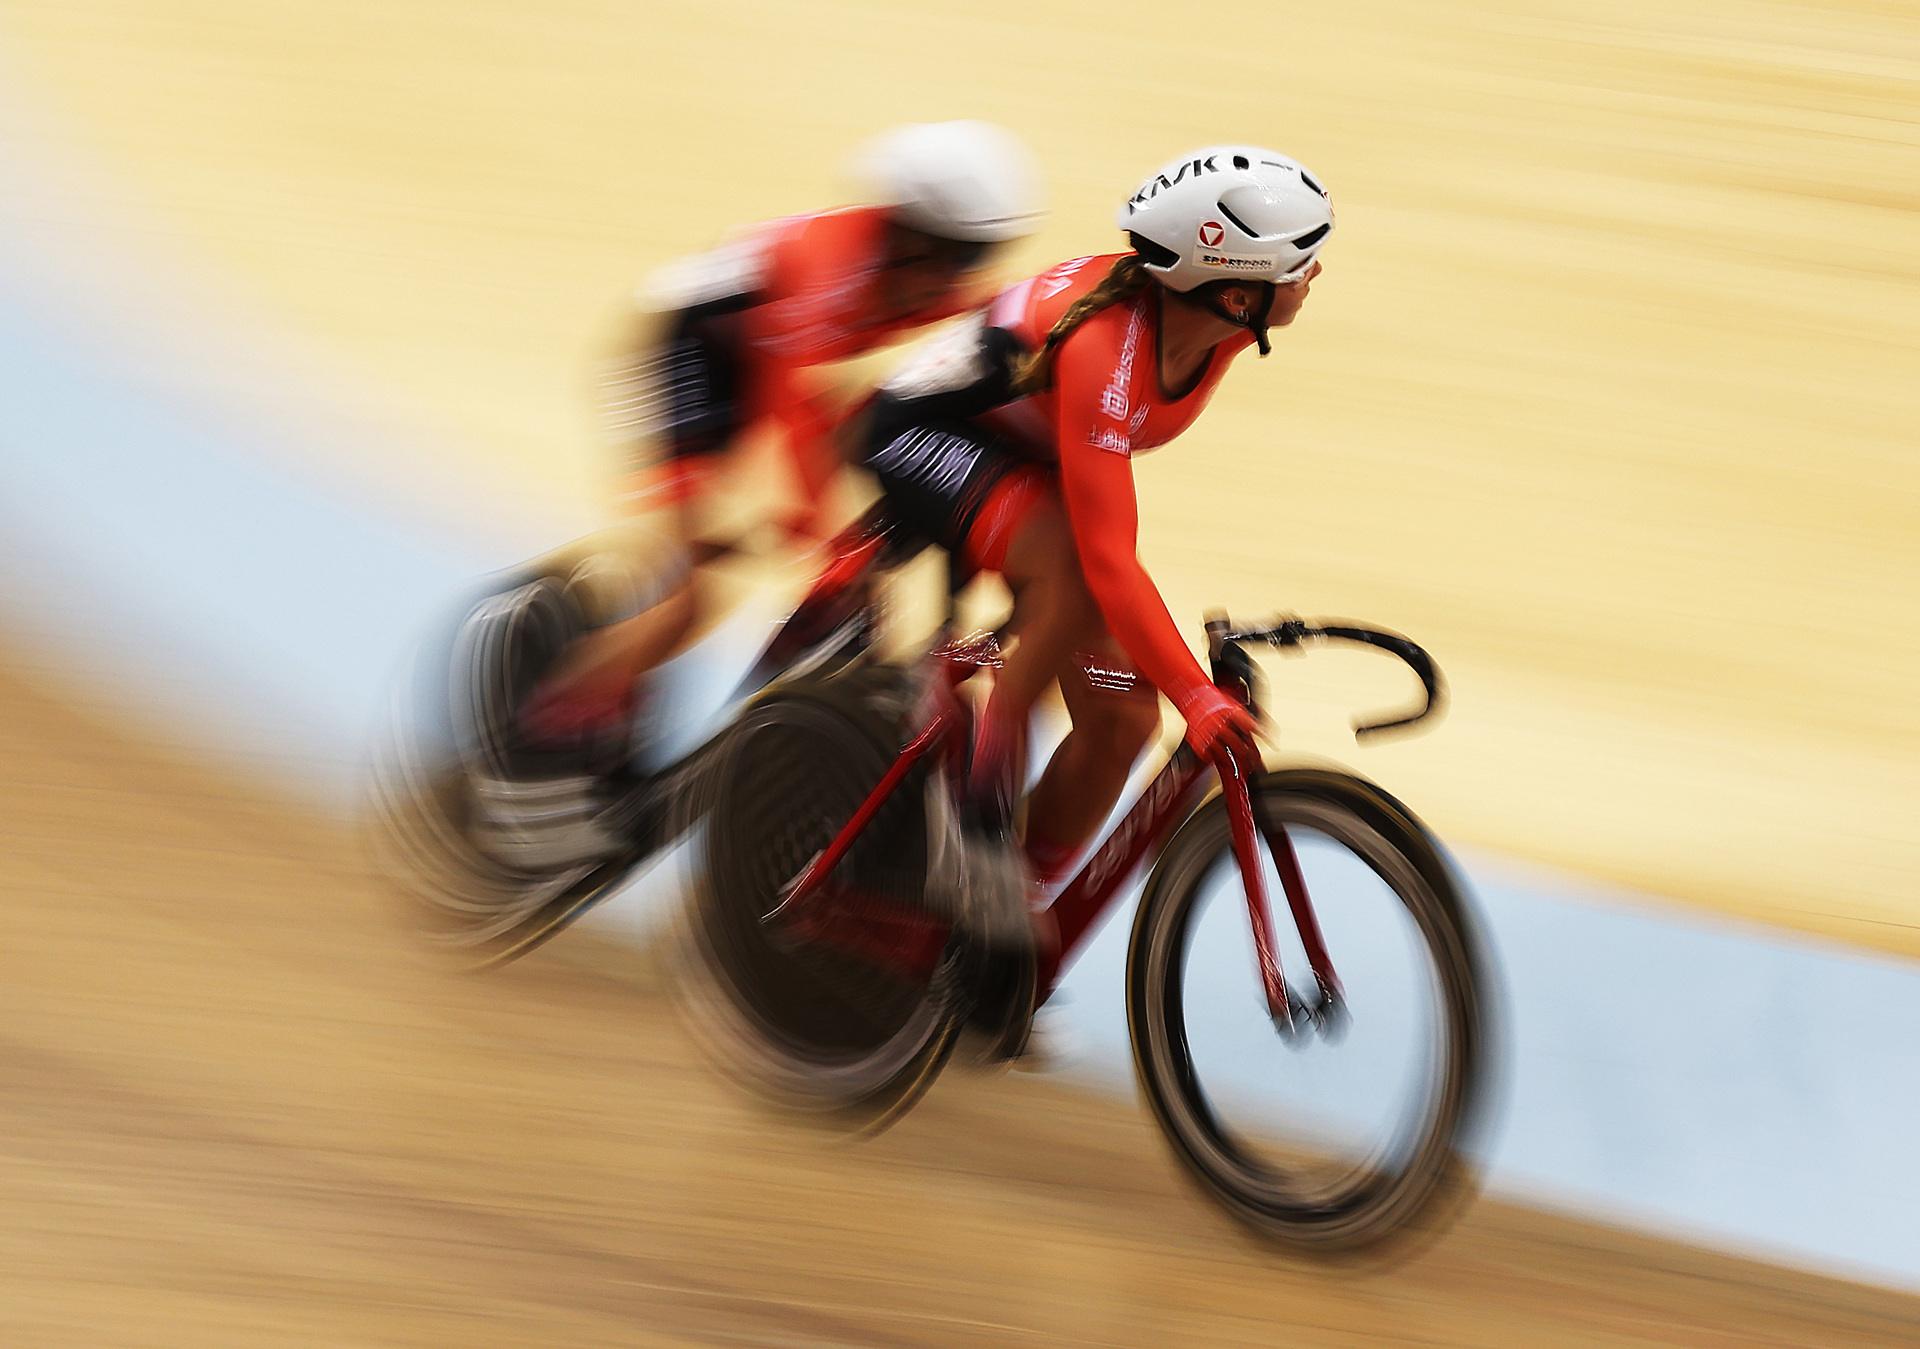 UCI World Cycling Championships to get underway this week